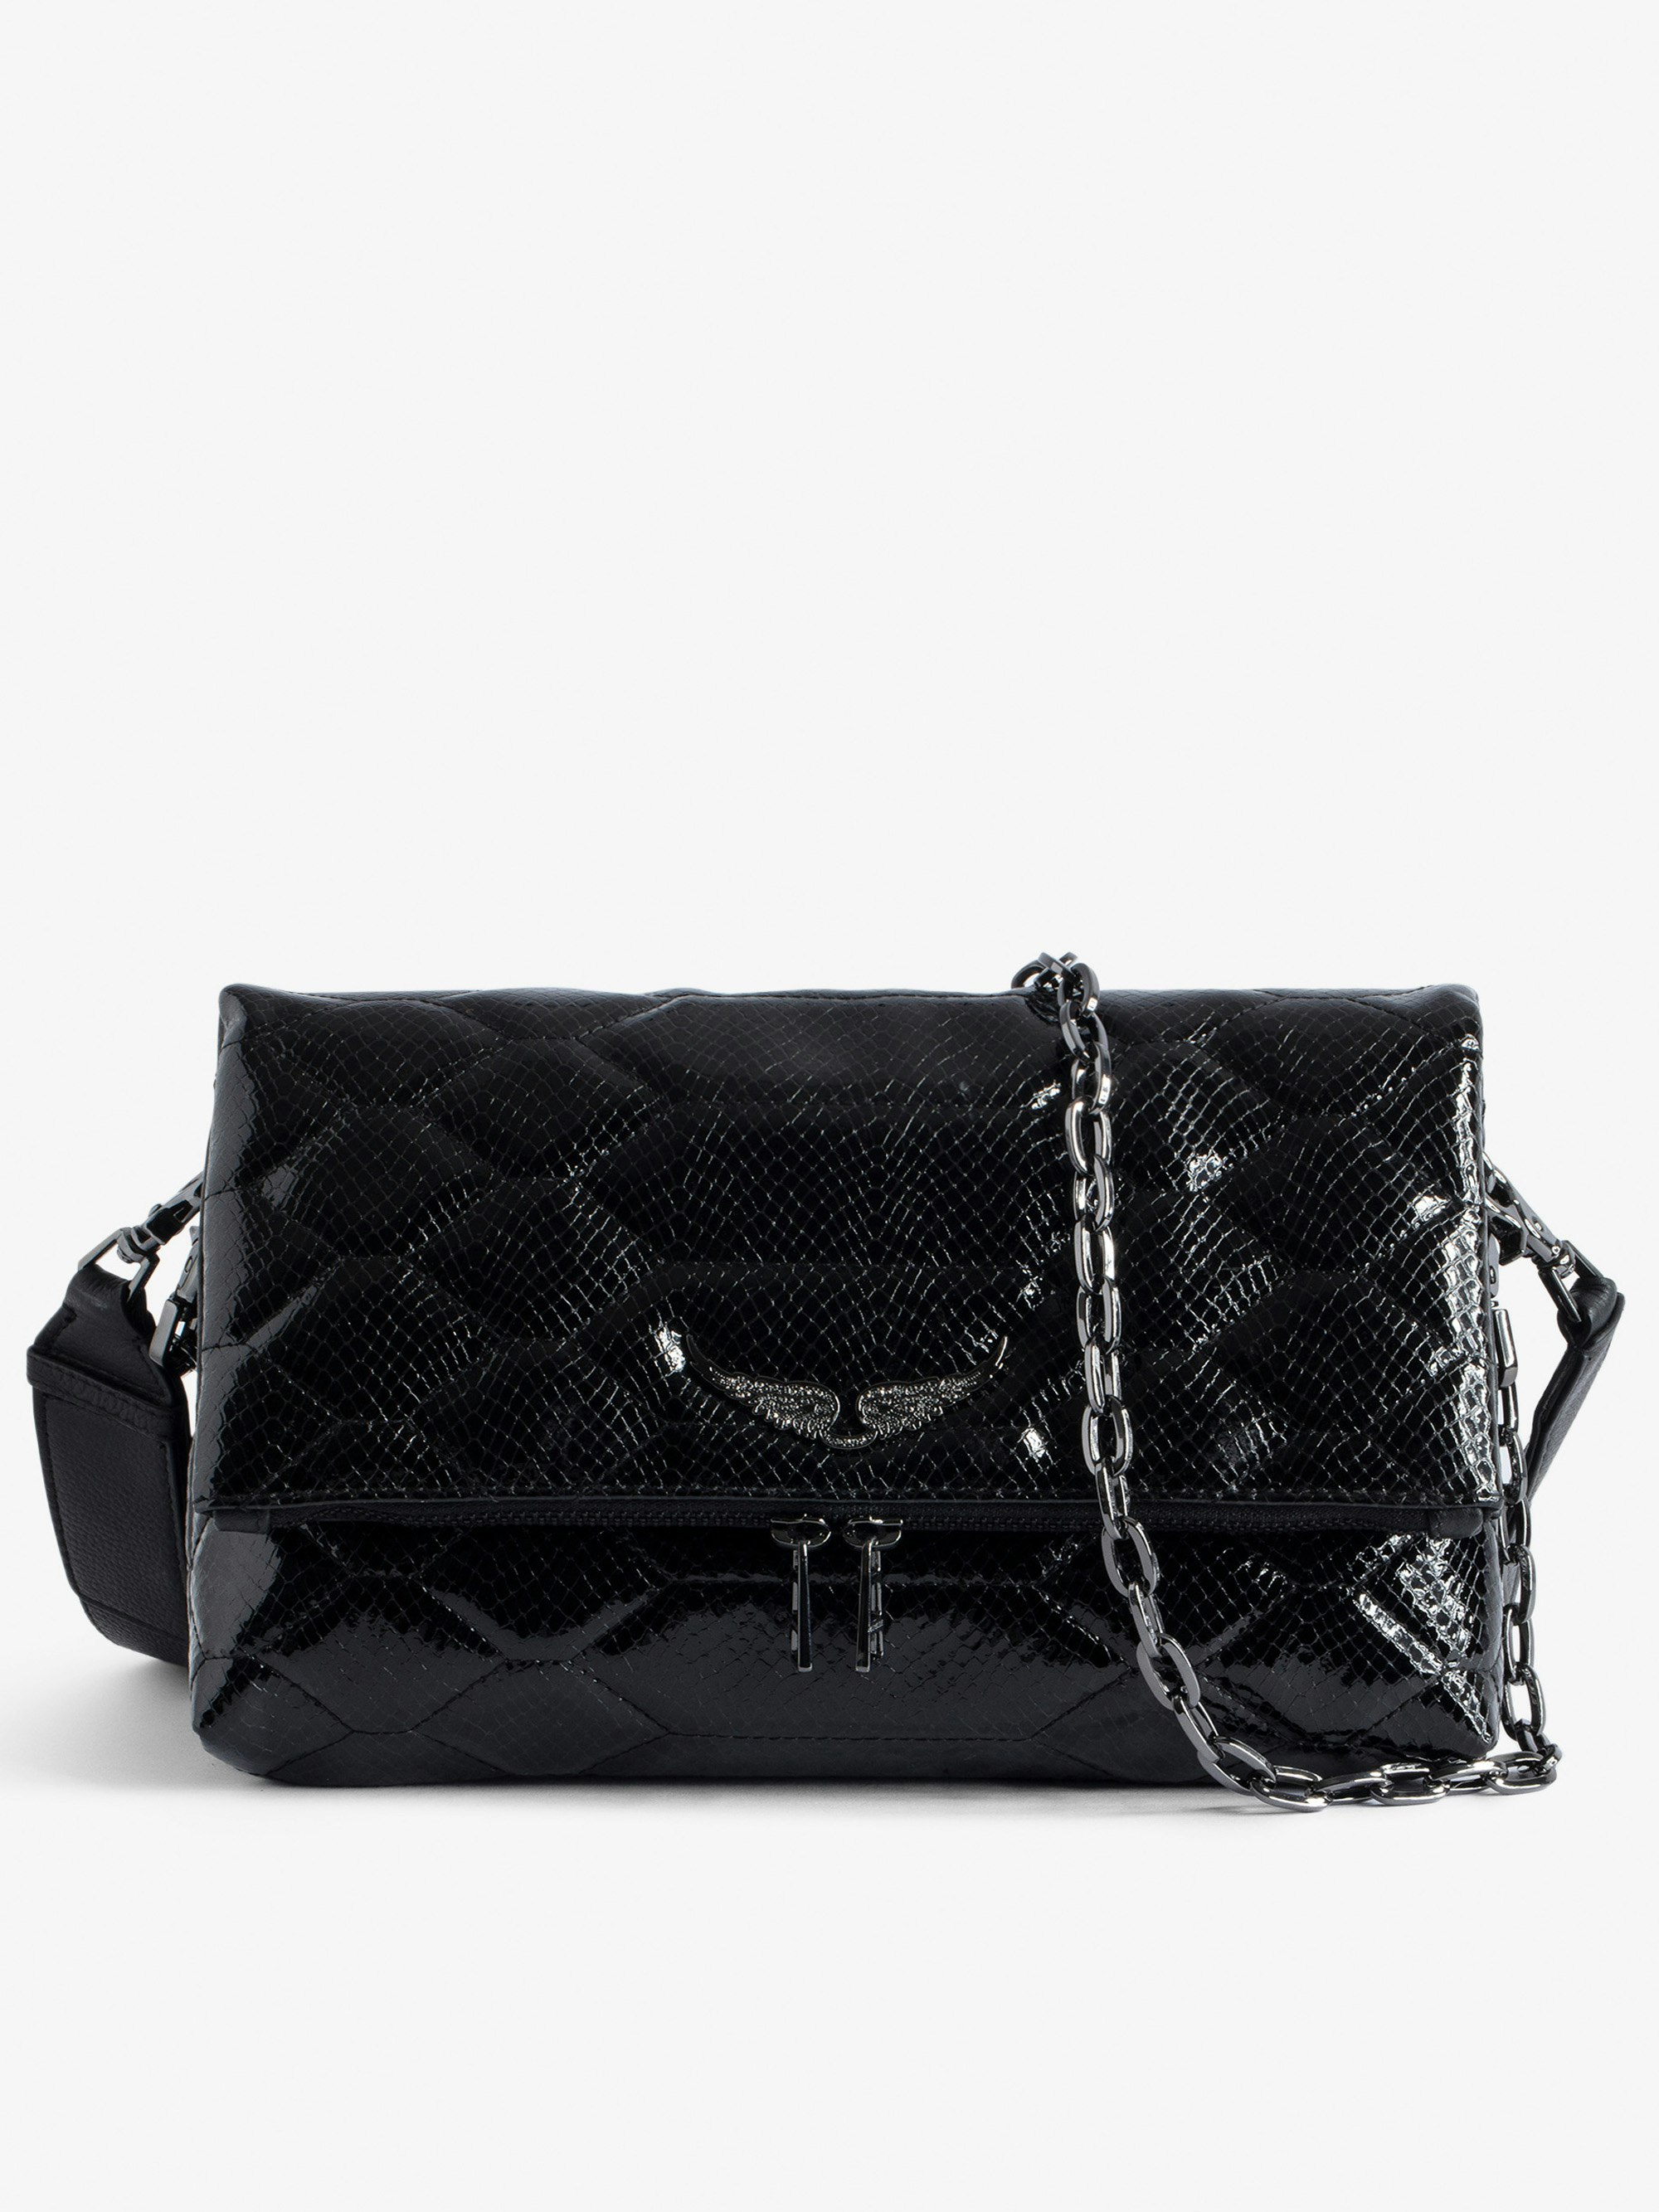 Rocky Quilted Bag - Women’s black quilted python-effect patent leather bag with shoulder strap and chain.